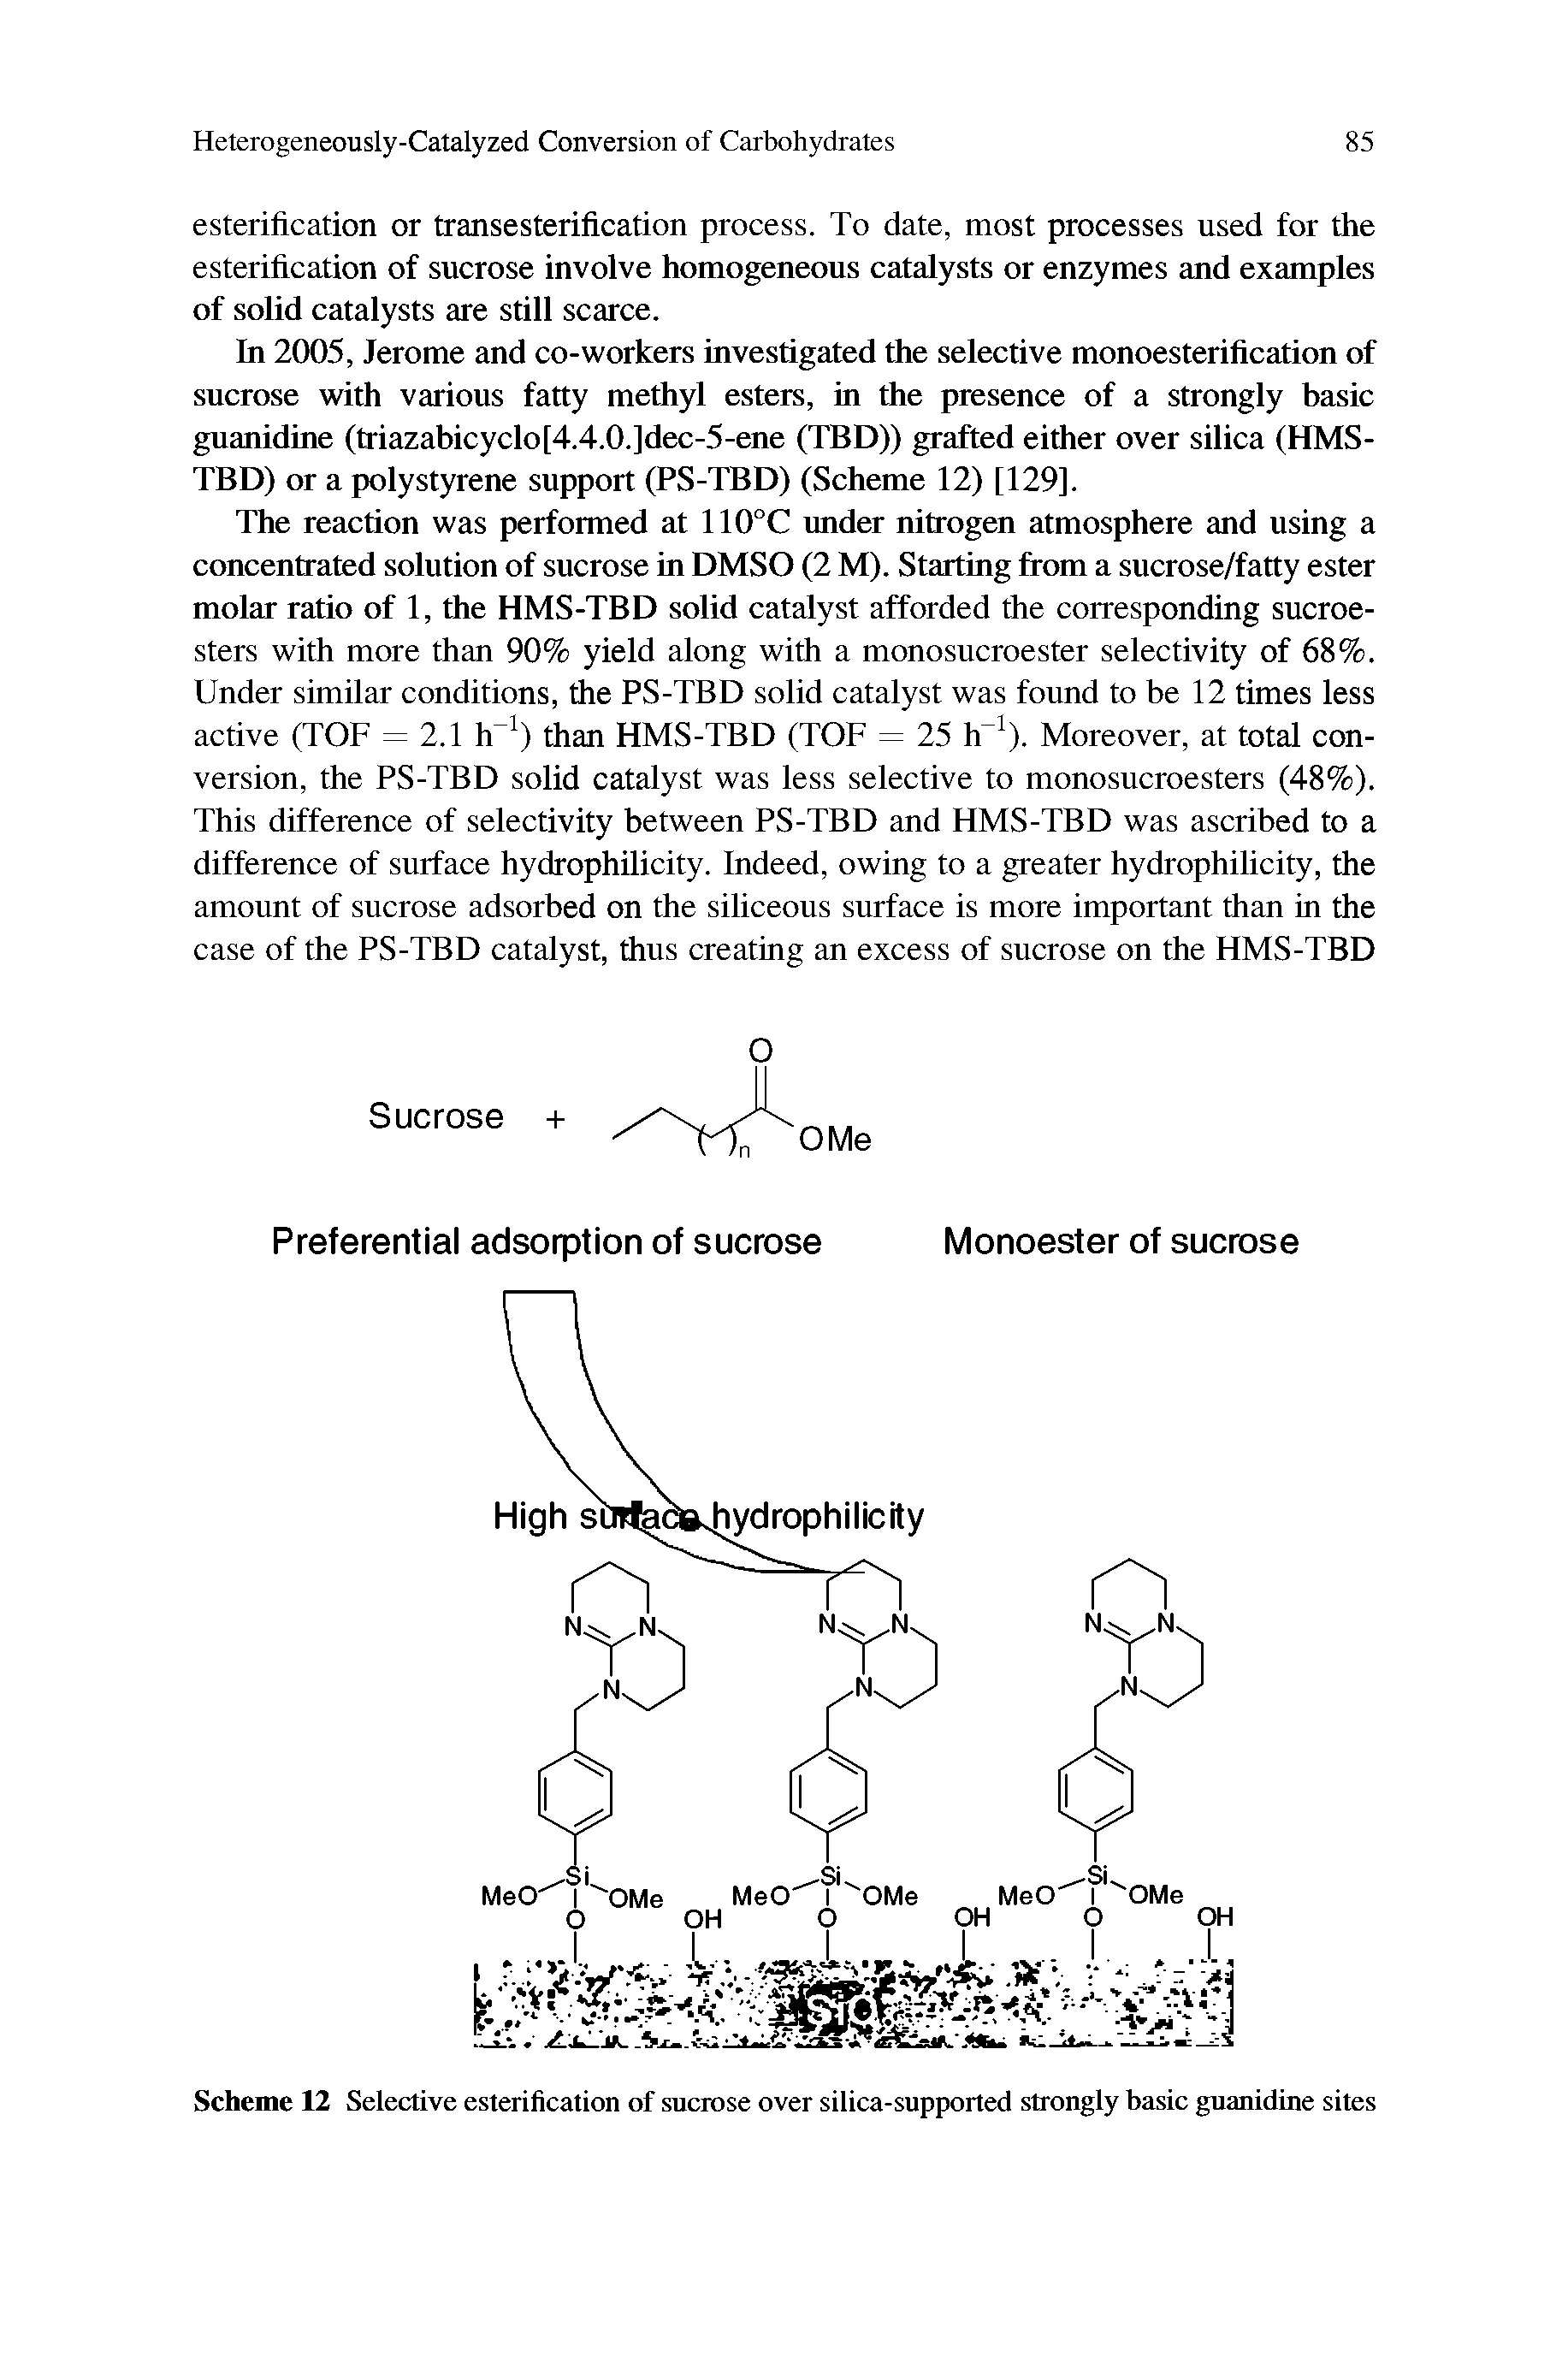 Scheme 12 Selective esterification of sucrose over silica-supported strongly basic guanidine sites...